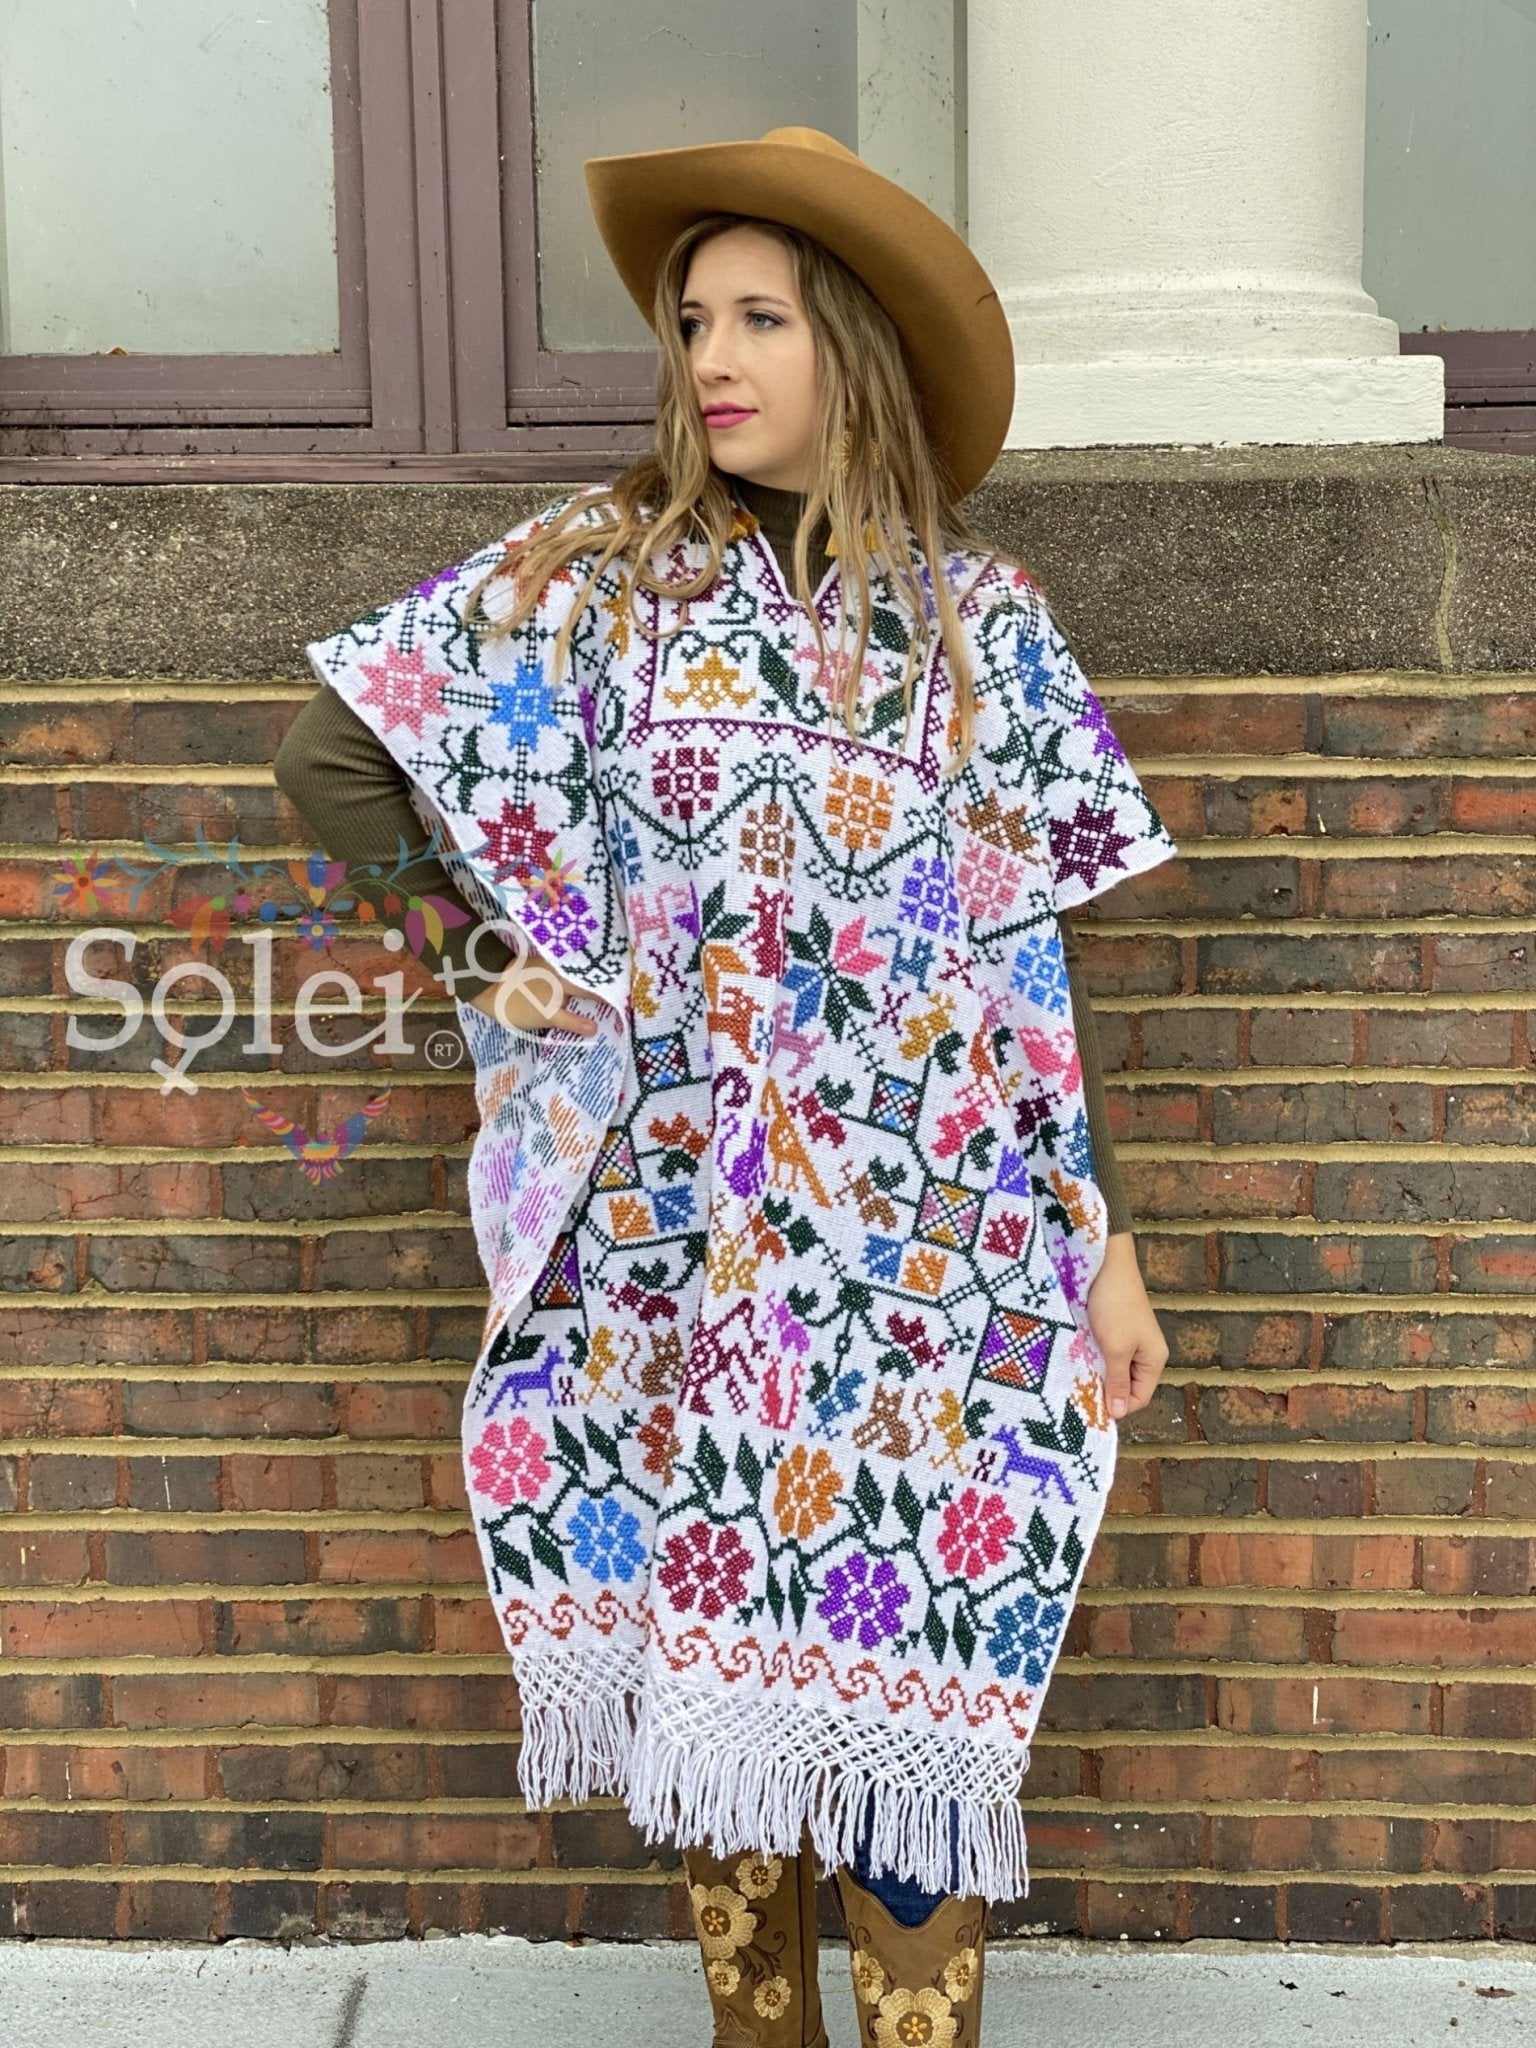 Mexican Hand Embroidered Poncho. Gaban Esquinero. - Solei Store